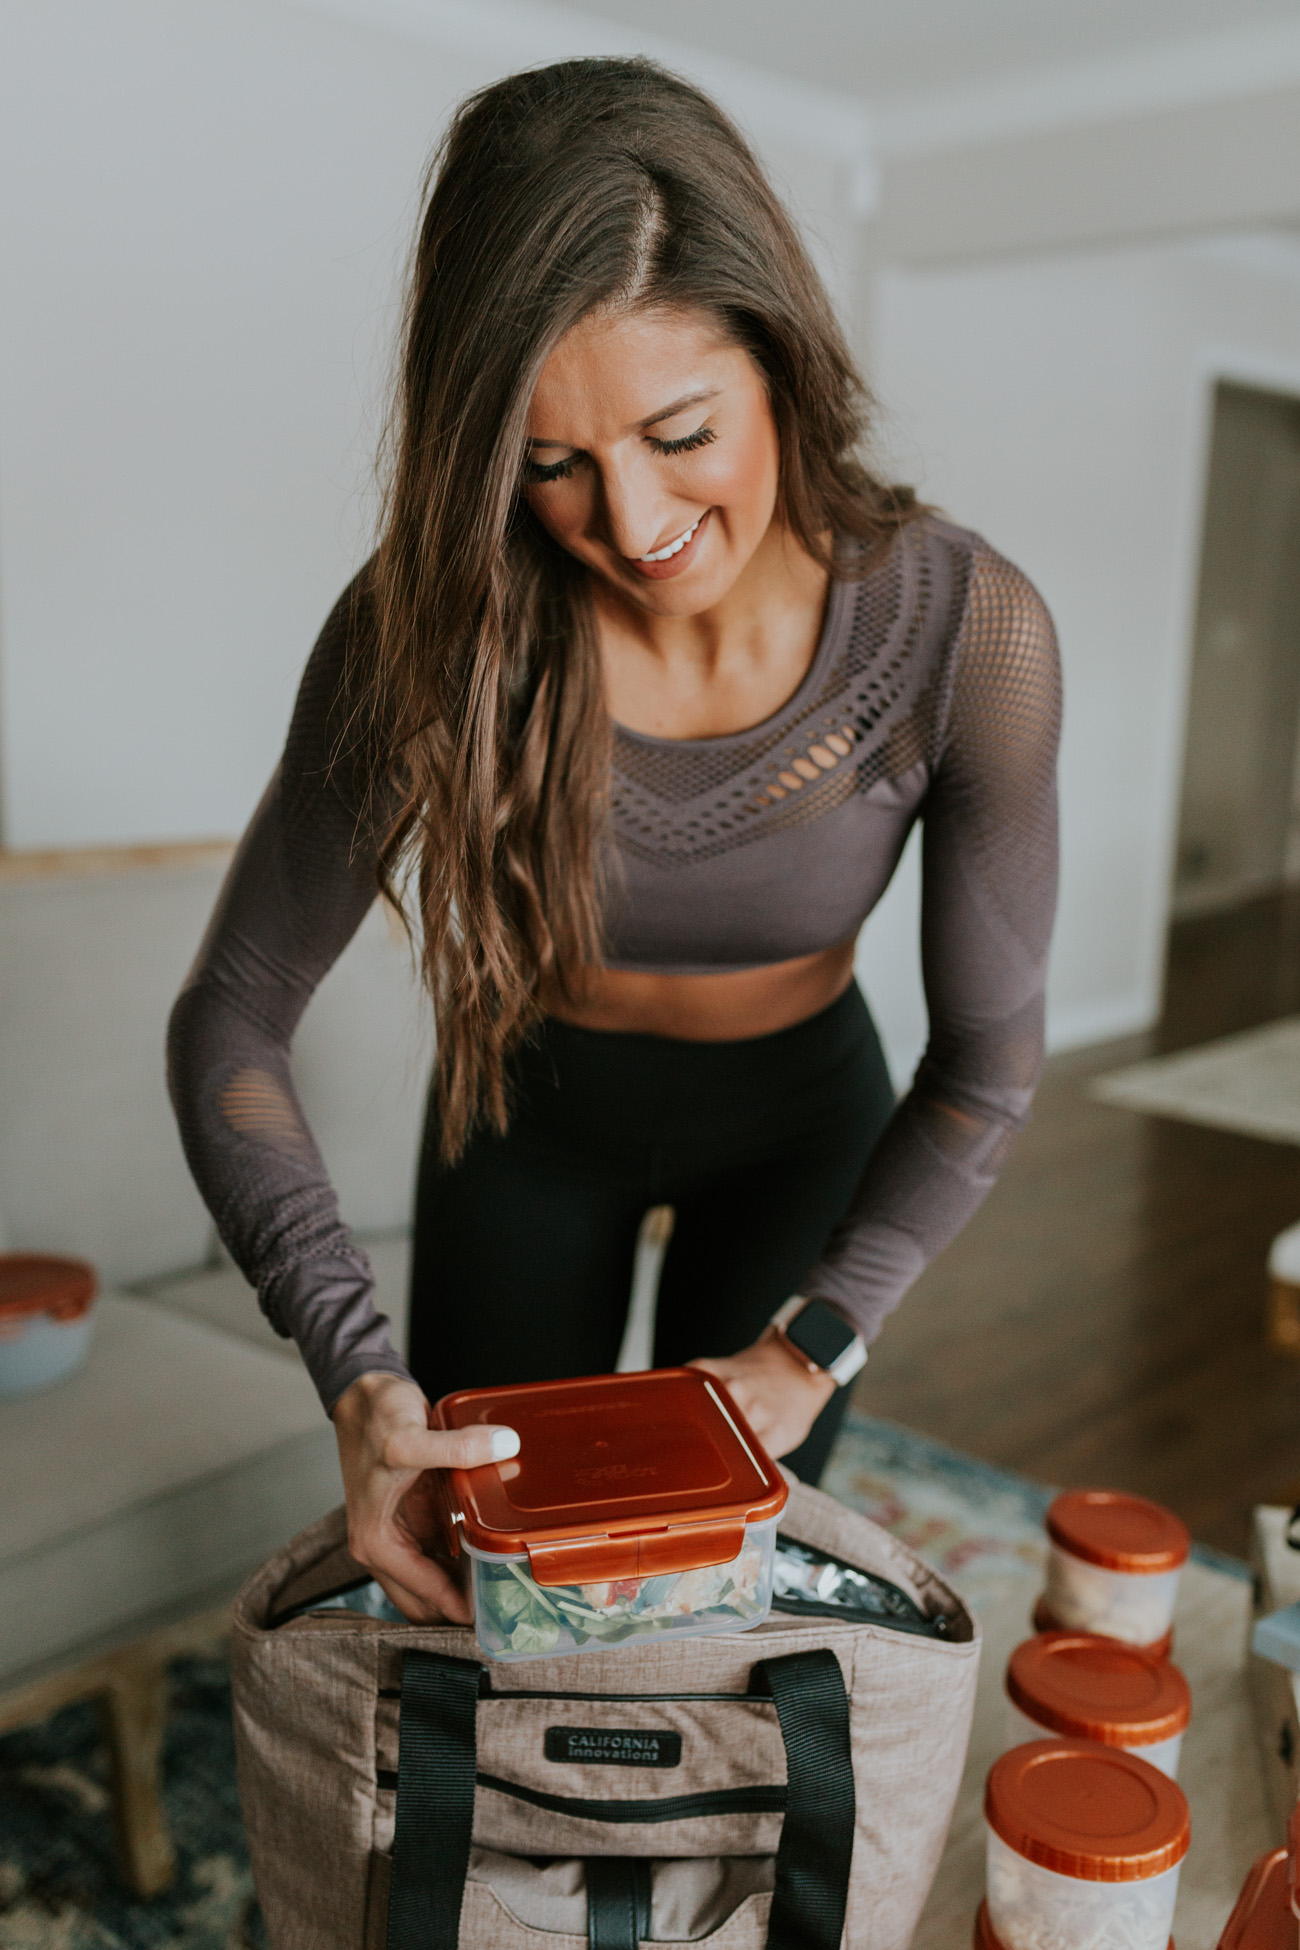 how to meal prep, meal prep containers, meal prep ideas, get fit for the new year, fitwithasd, protein powder, supplements, collagen powder, meal prep containters // grace white a southern drawl